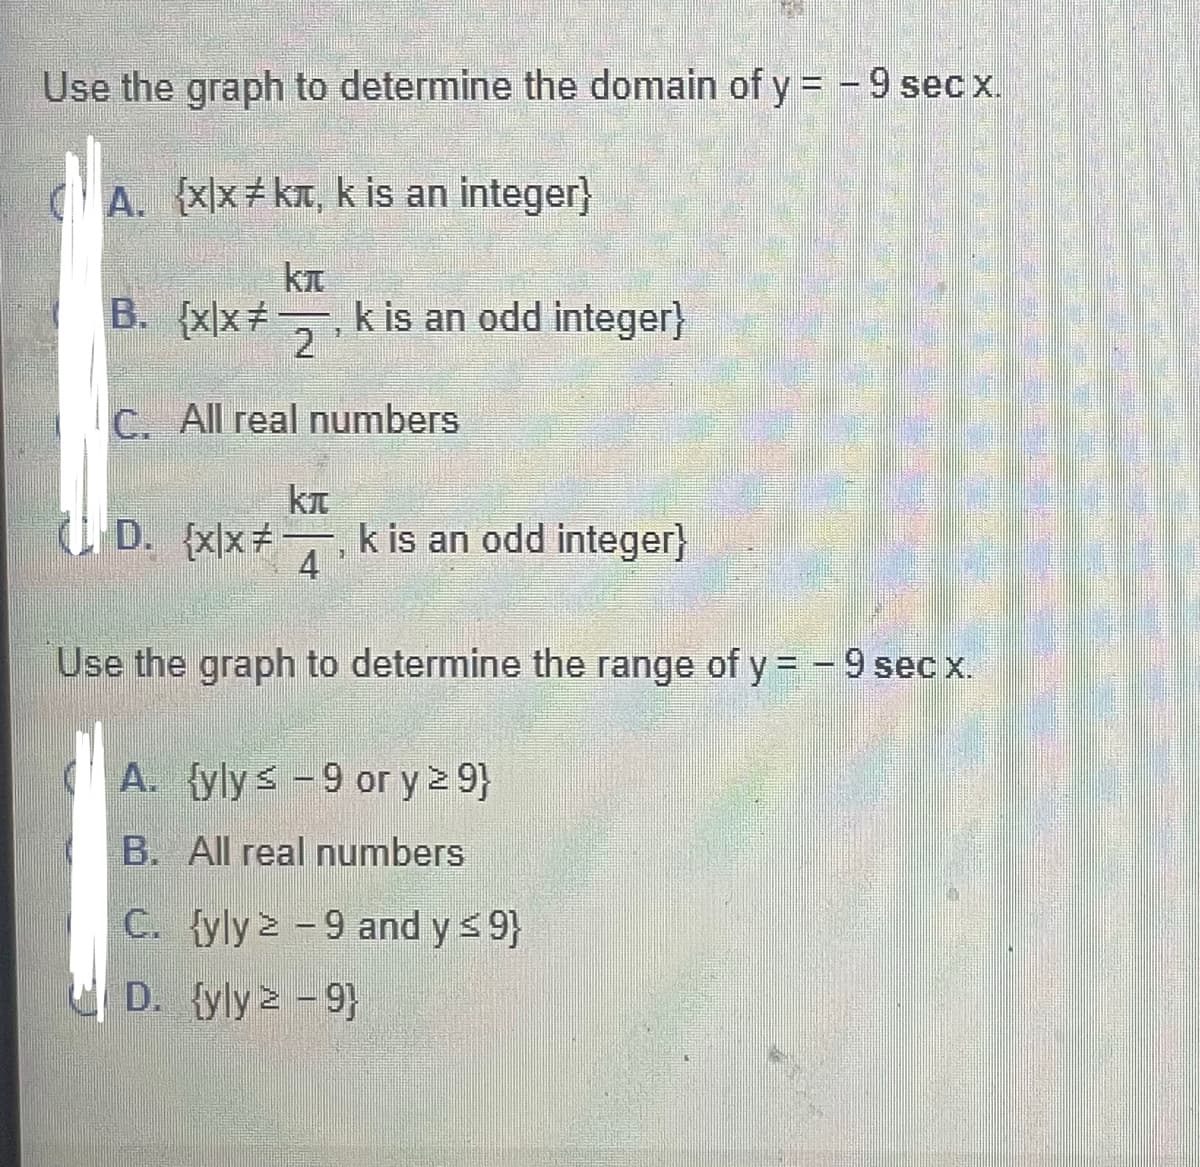 Use the graph to determine the domain of y = -9 sec x.
Axx kT, k is an integer}
B. {xx+
k is an odd integer}
2
C. All real numbers
U D. {x\x
k is an odd integer}
4
Use the graph to determine the range of y = -9 sec x.
A. {yly< -9 or y > 9}
B. All real numbers
C. {yly > -9 and ys 9}
D. {yly 2 - 9}
